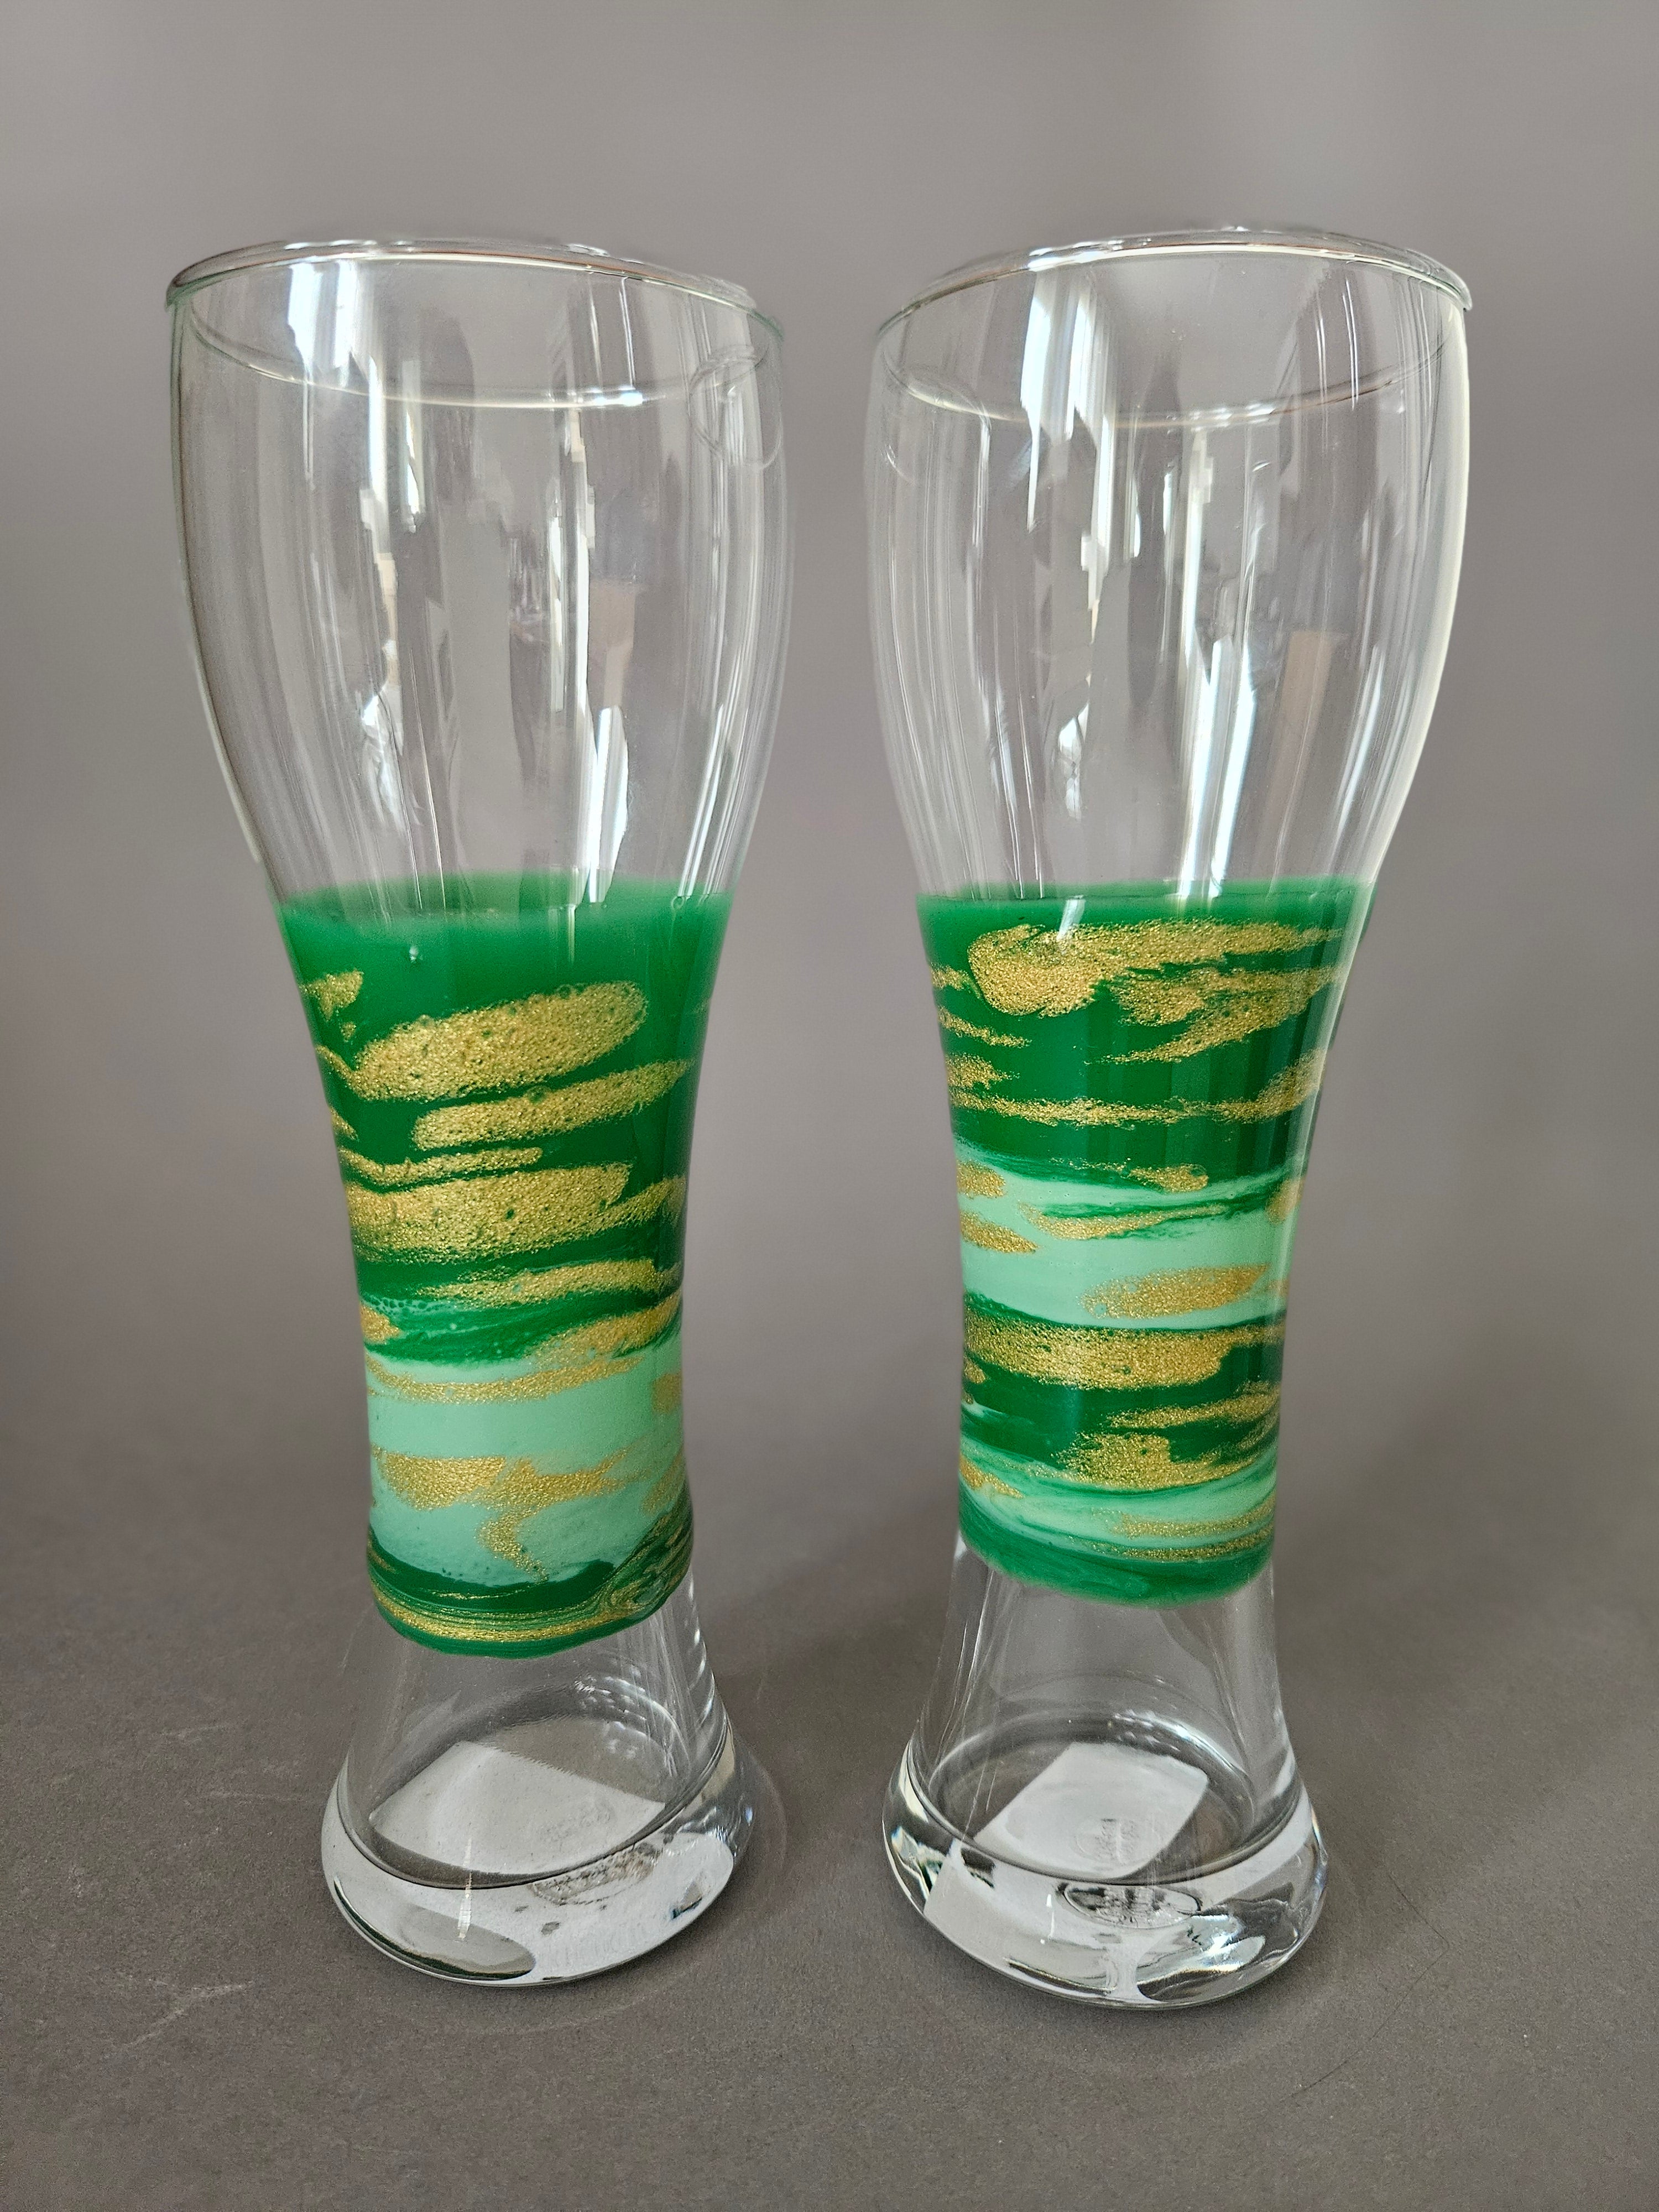 Beer/smoothie green glass set of 2